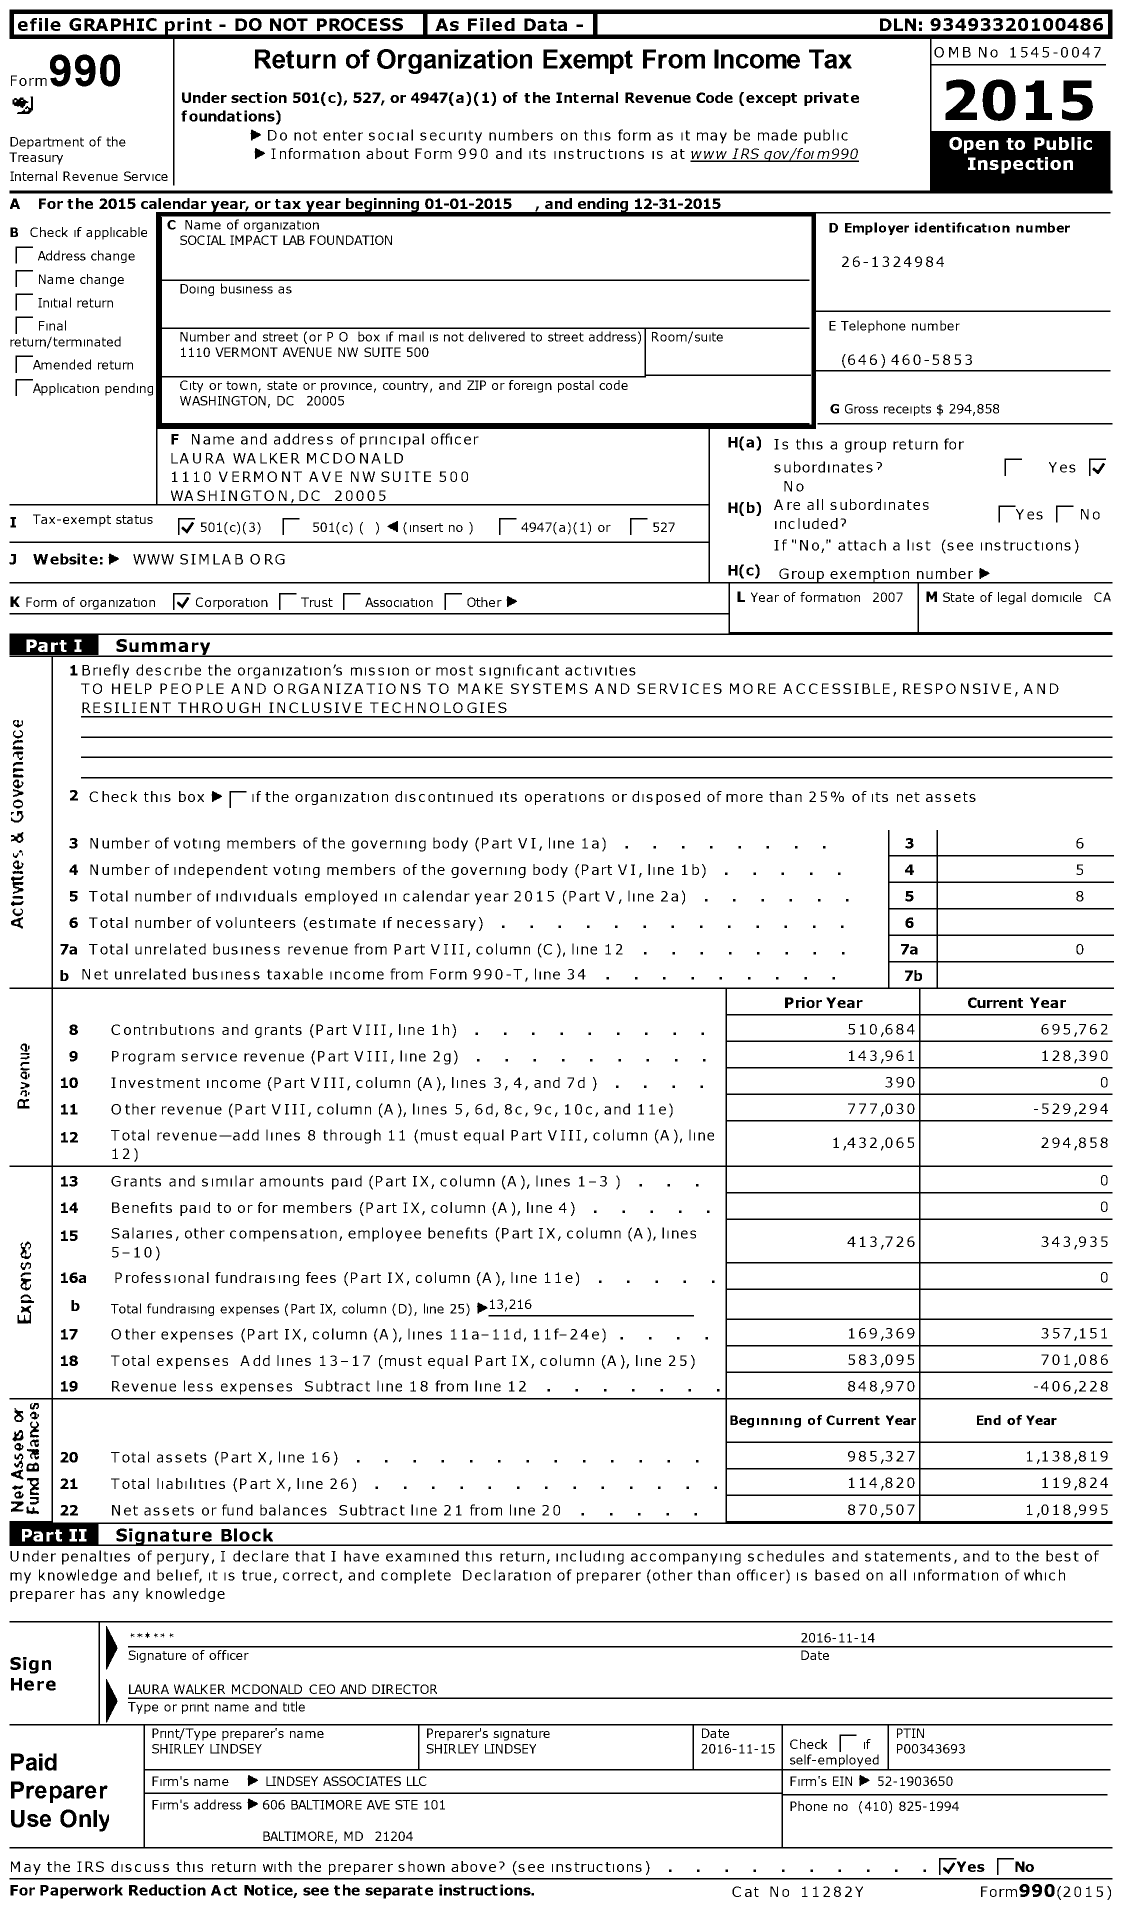 Image of first page of 2015 Form 990 for Social Impact Lab Foundation